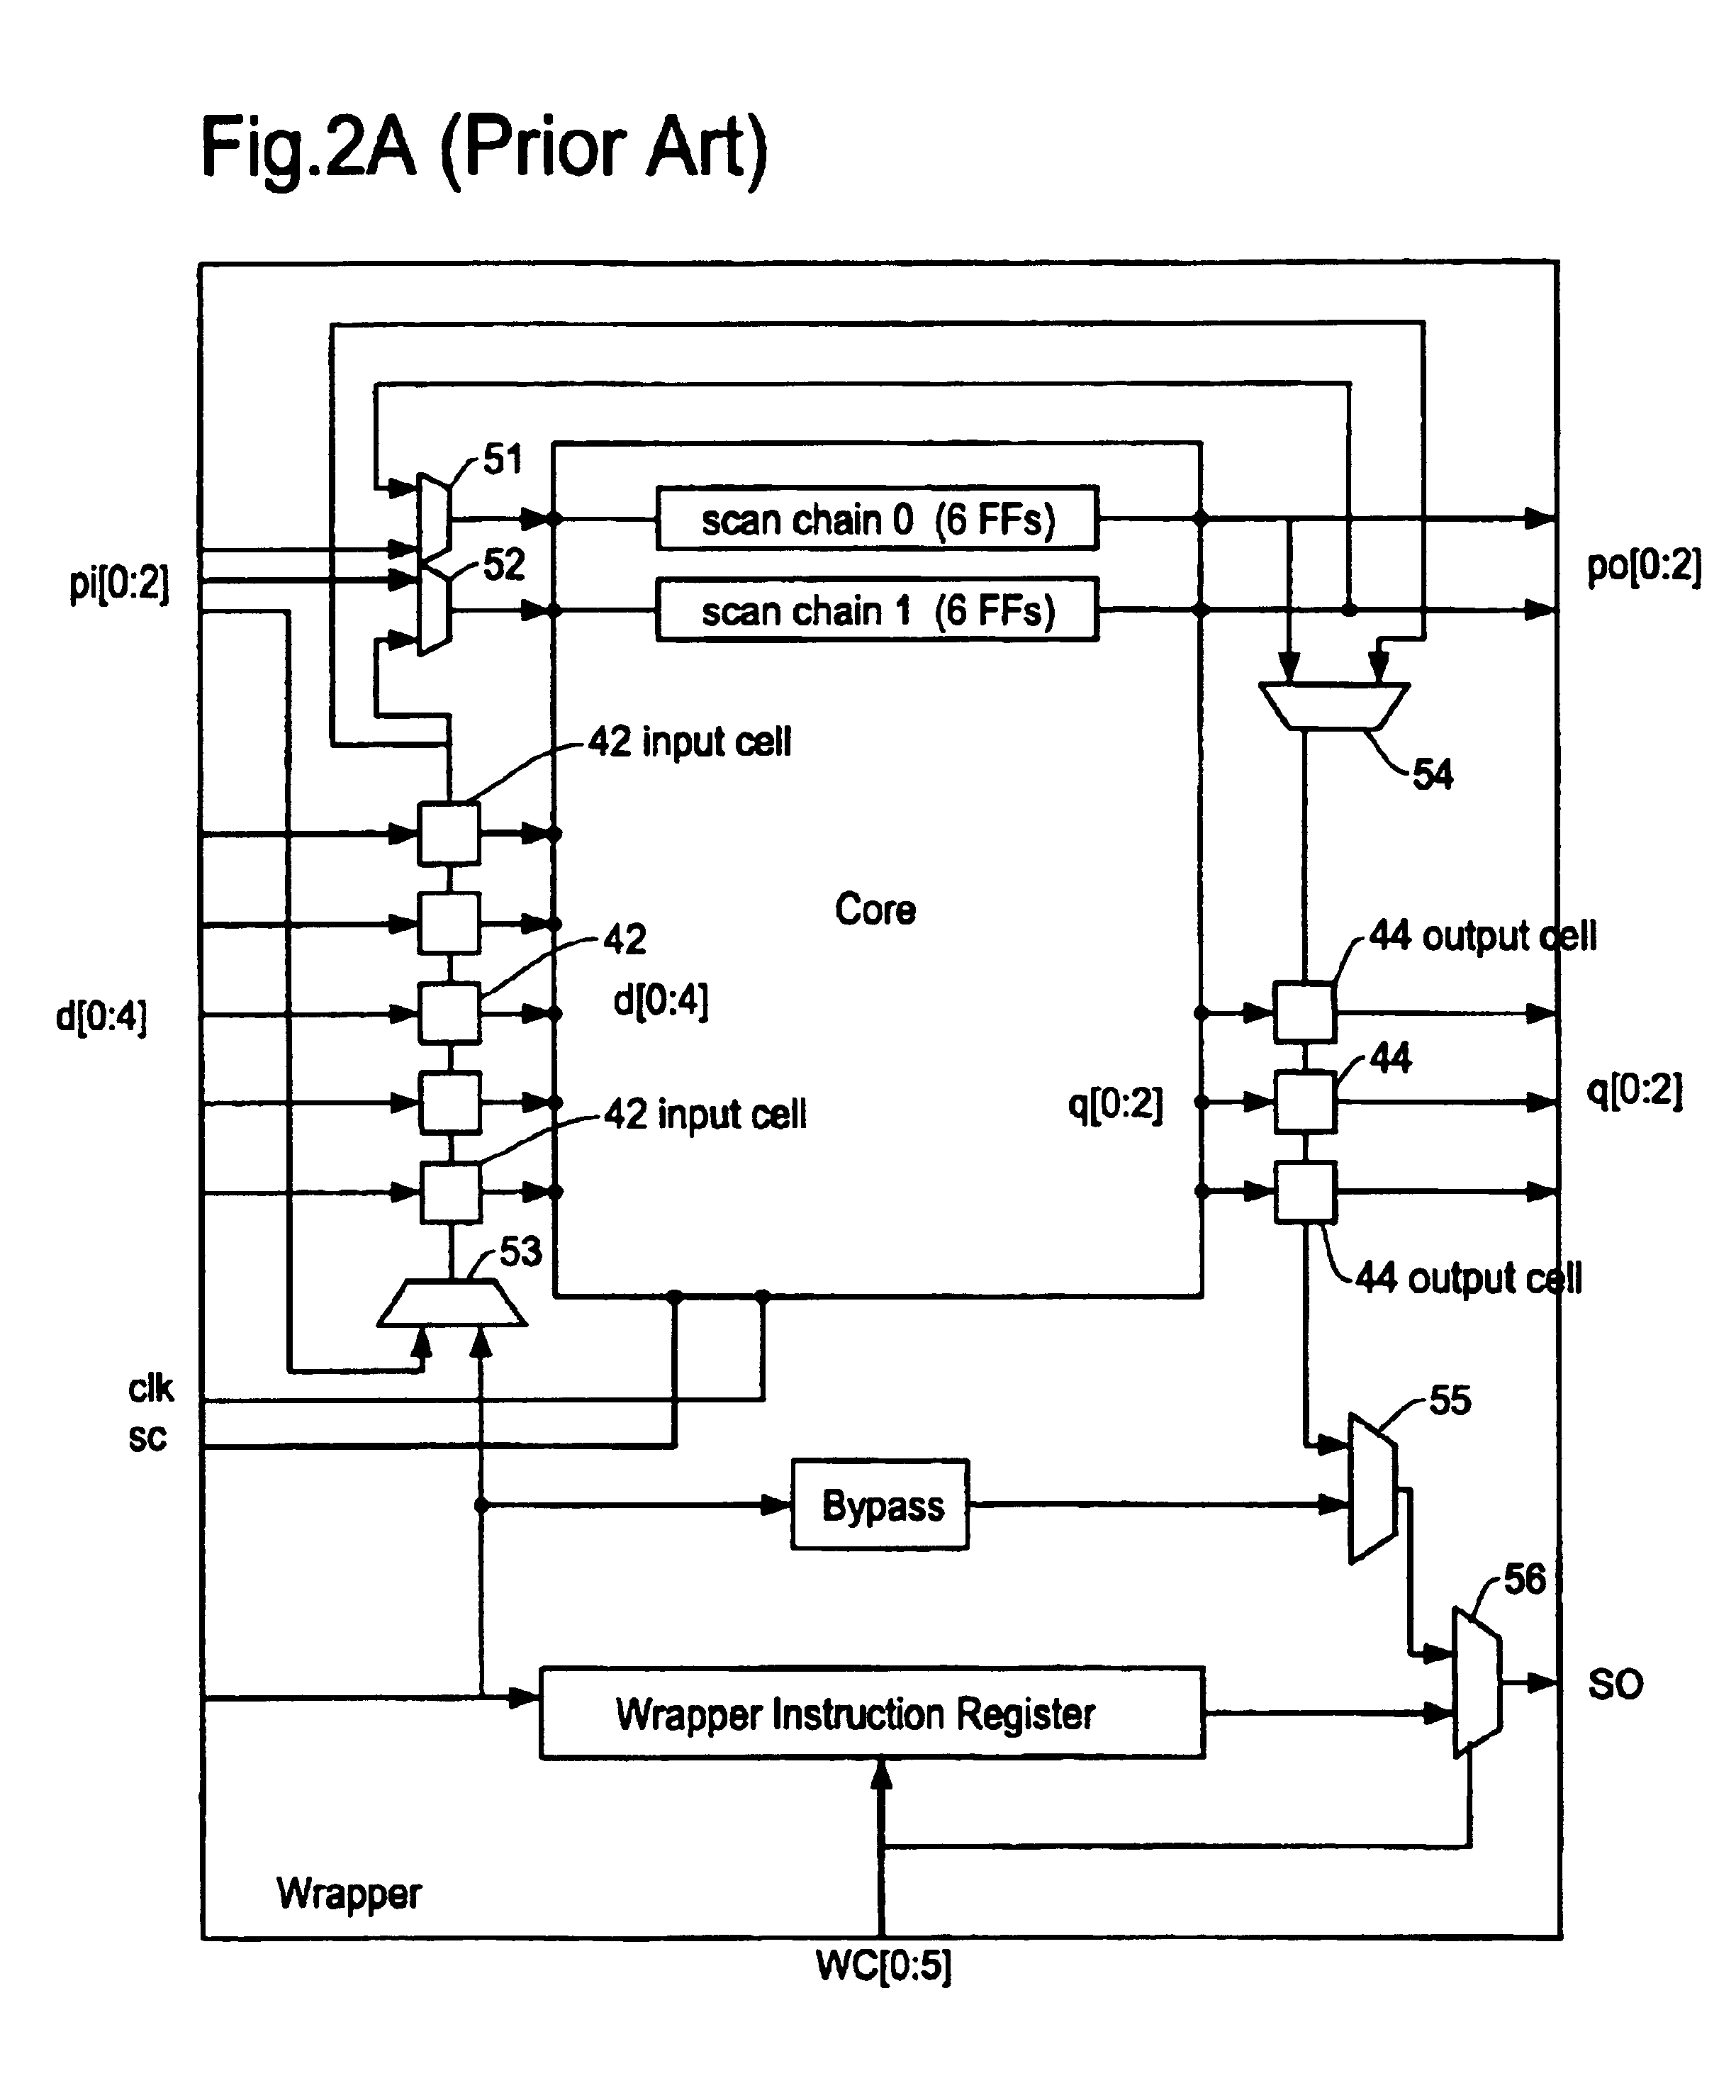 Method of evaluating core based system-on-a-chip (SoC) and structure of SoC incorporating same